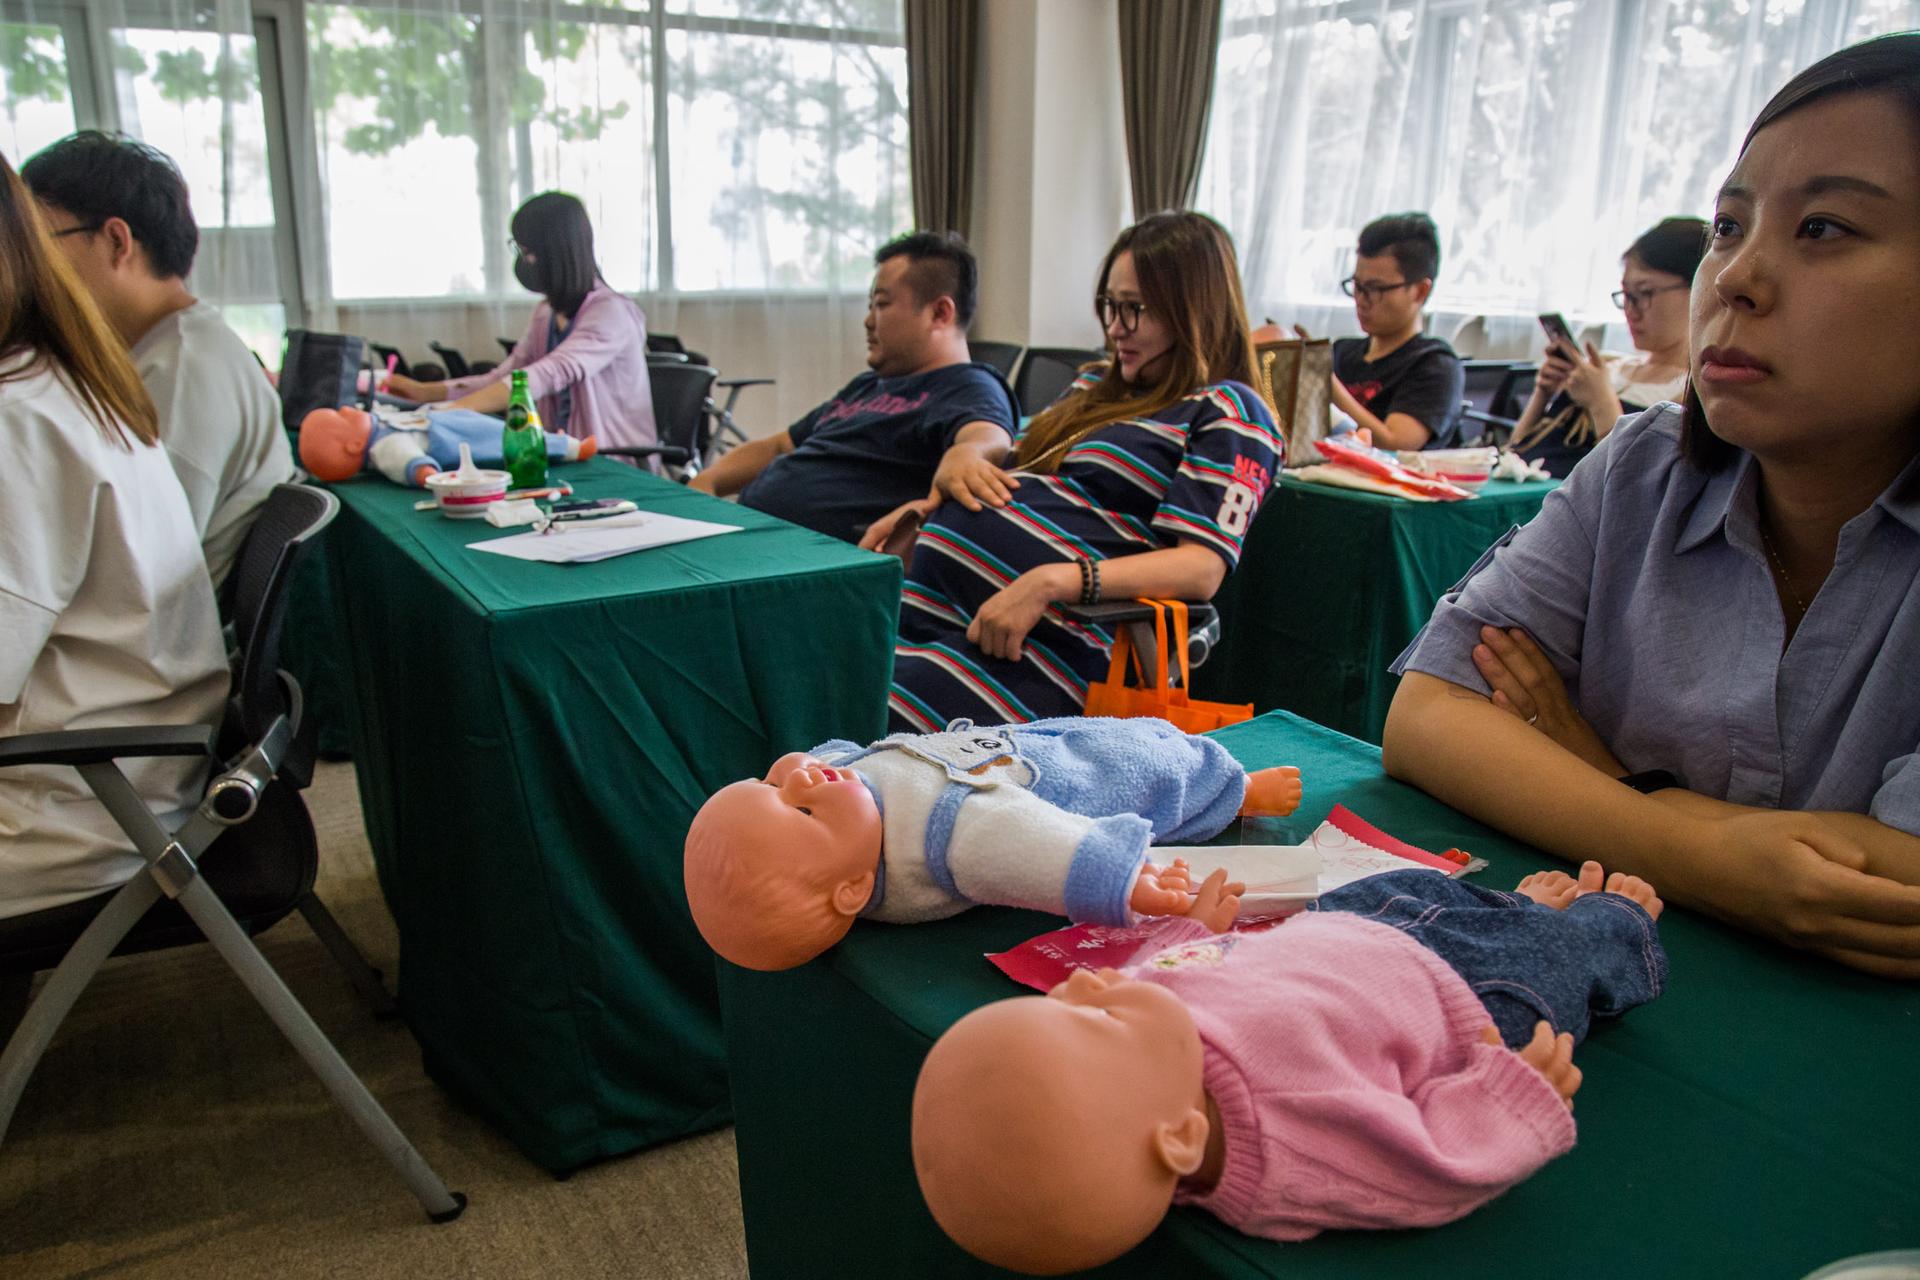 A visibly pregnant woman sits in a parenting class with dolls on the table.